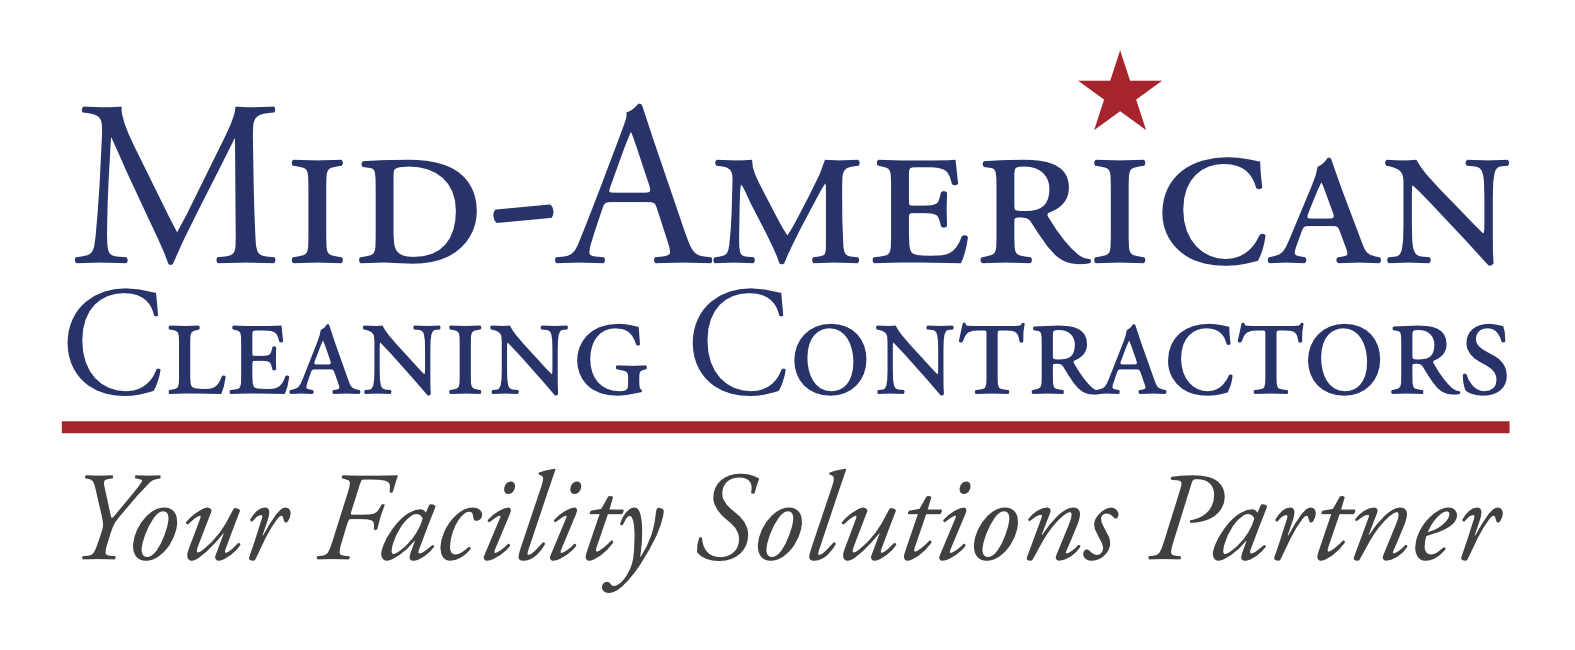 Mid American Cleaning Contractors